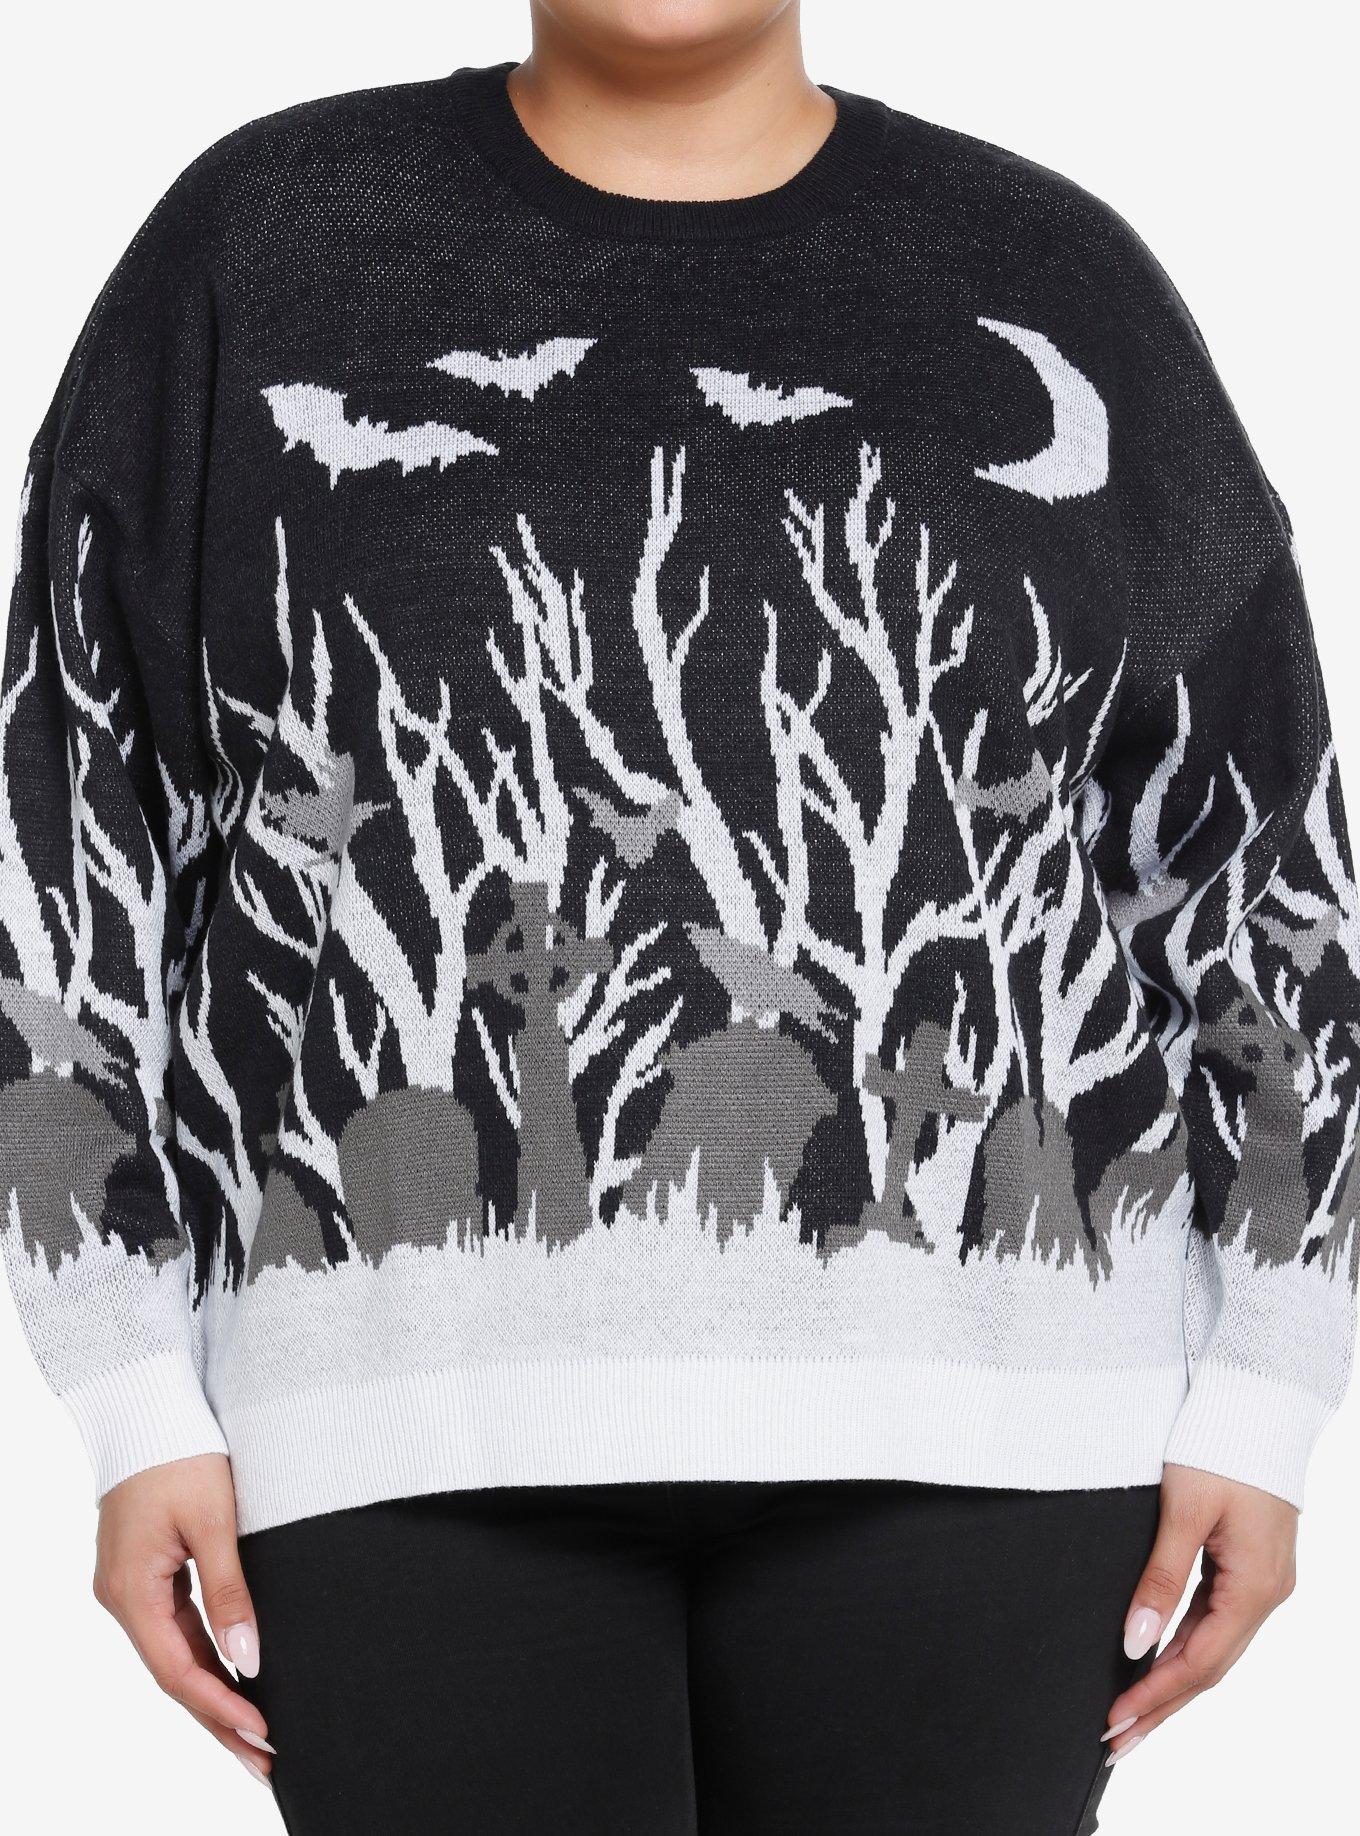 Thorn & Fable Cemetery Girls Sweater Plus Size, BLACK, hi-res